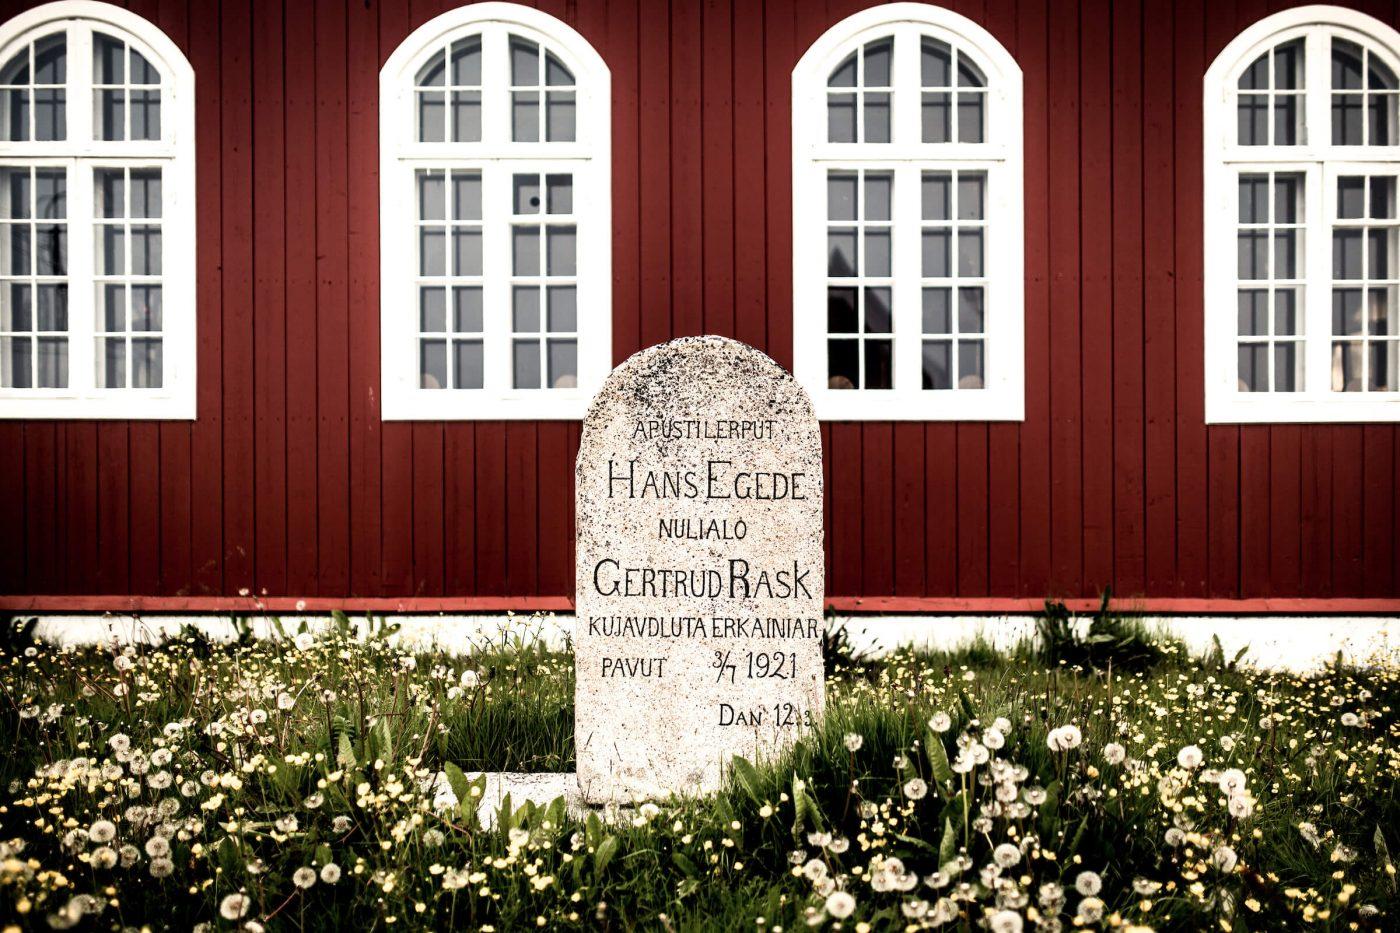 A stone in front of the old church in Qaqortoq in South Greenland commemorating Hans Egede and Gertrud Rask. By Mads Pihl